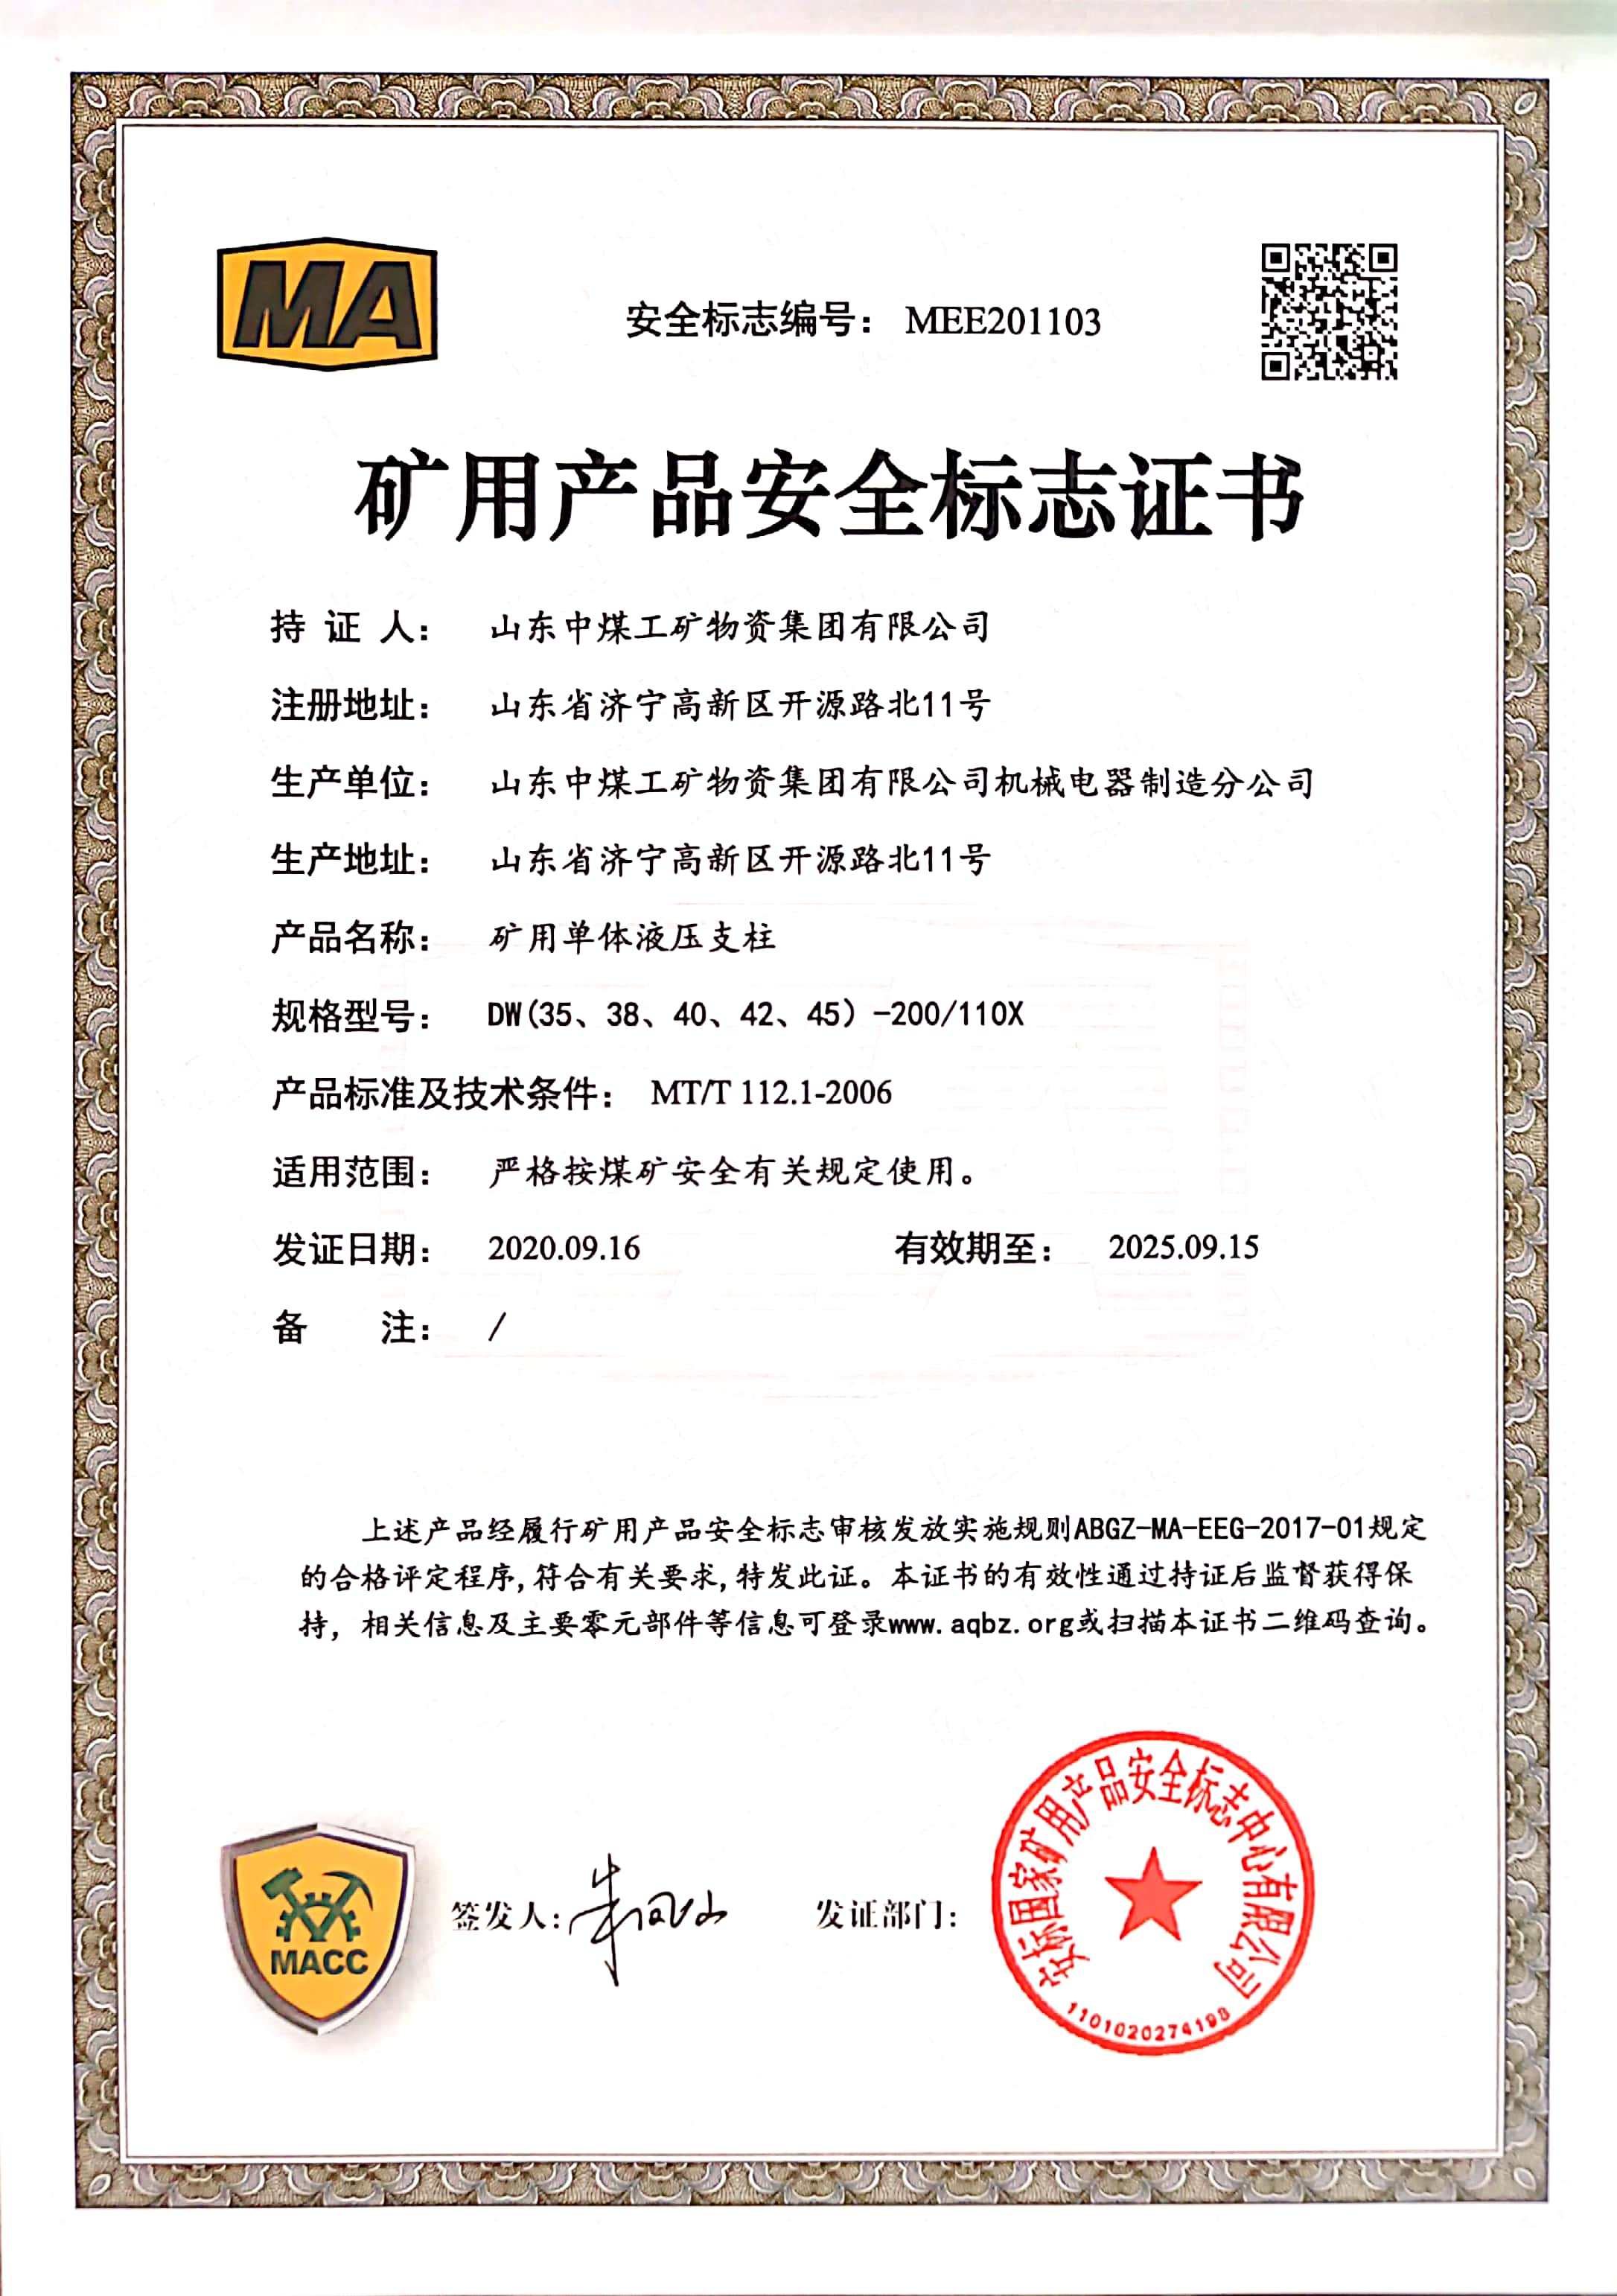 Congratulations To China Coal Group'S Mining Single Hydraulic Prop Products For Adding 5 National Mining Product Safety Mark Certification